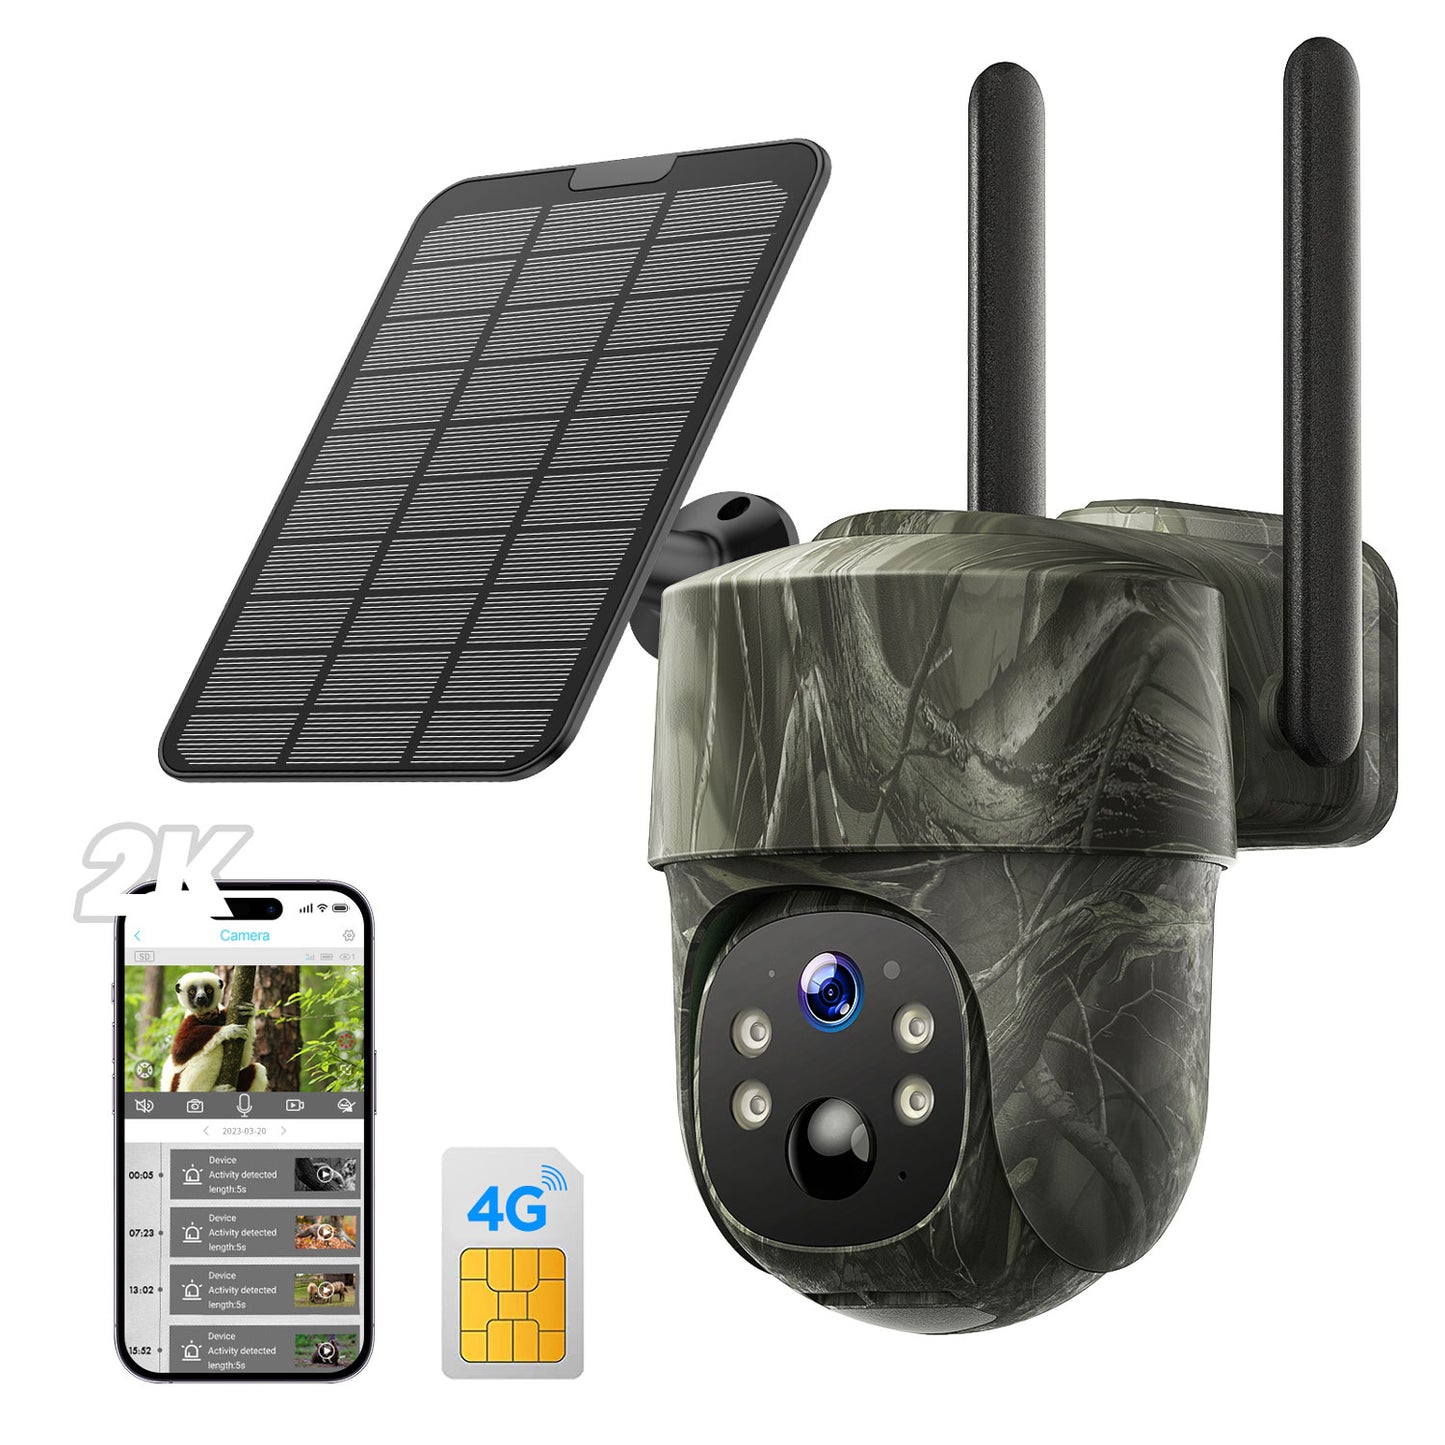 Campark 4G LTE Cellular Trail Camera Solar with SIM Card, Wireless Outdoor No Wifi Game Hunting Camera, 2K HD PTZ Night Vision Waterproof Motion Detection Security Cam with Cloud Storage